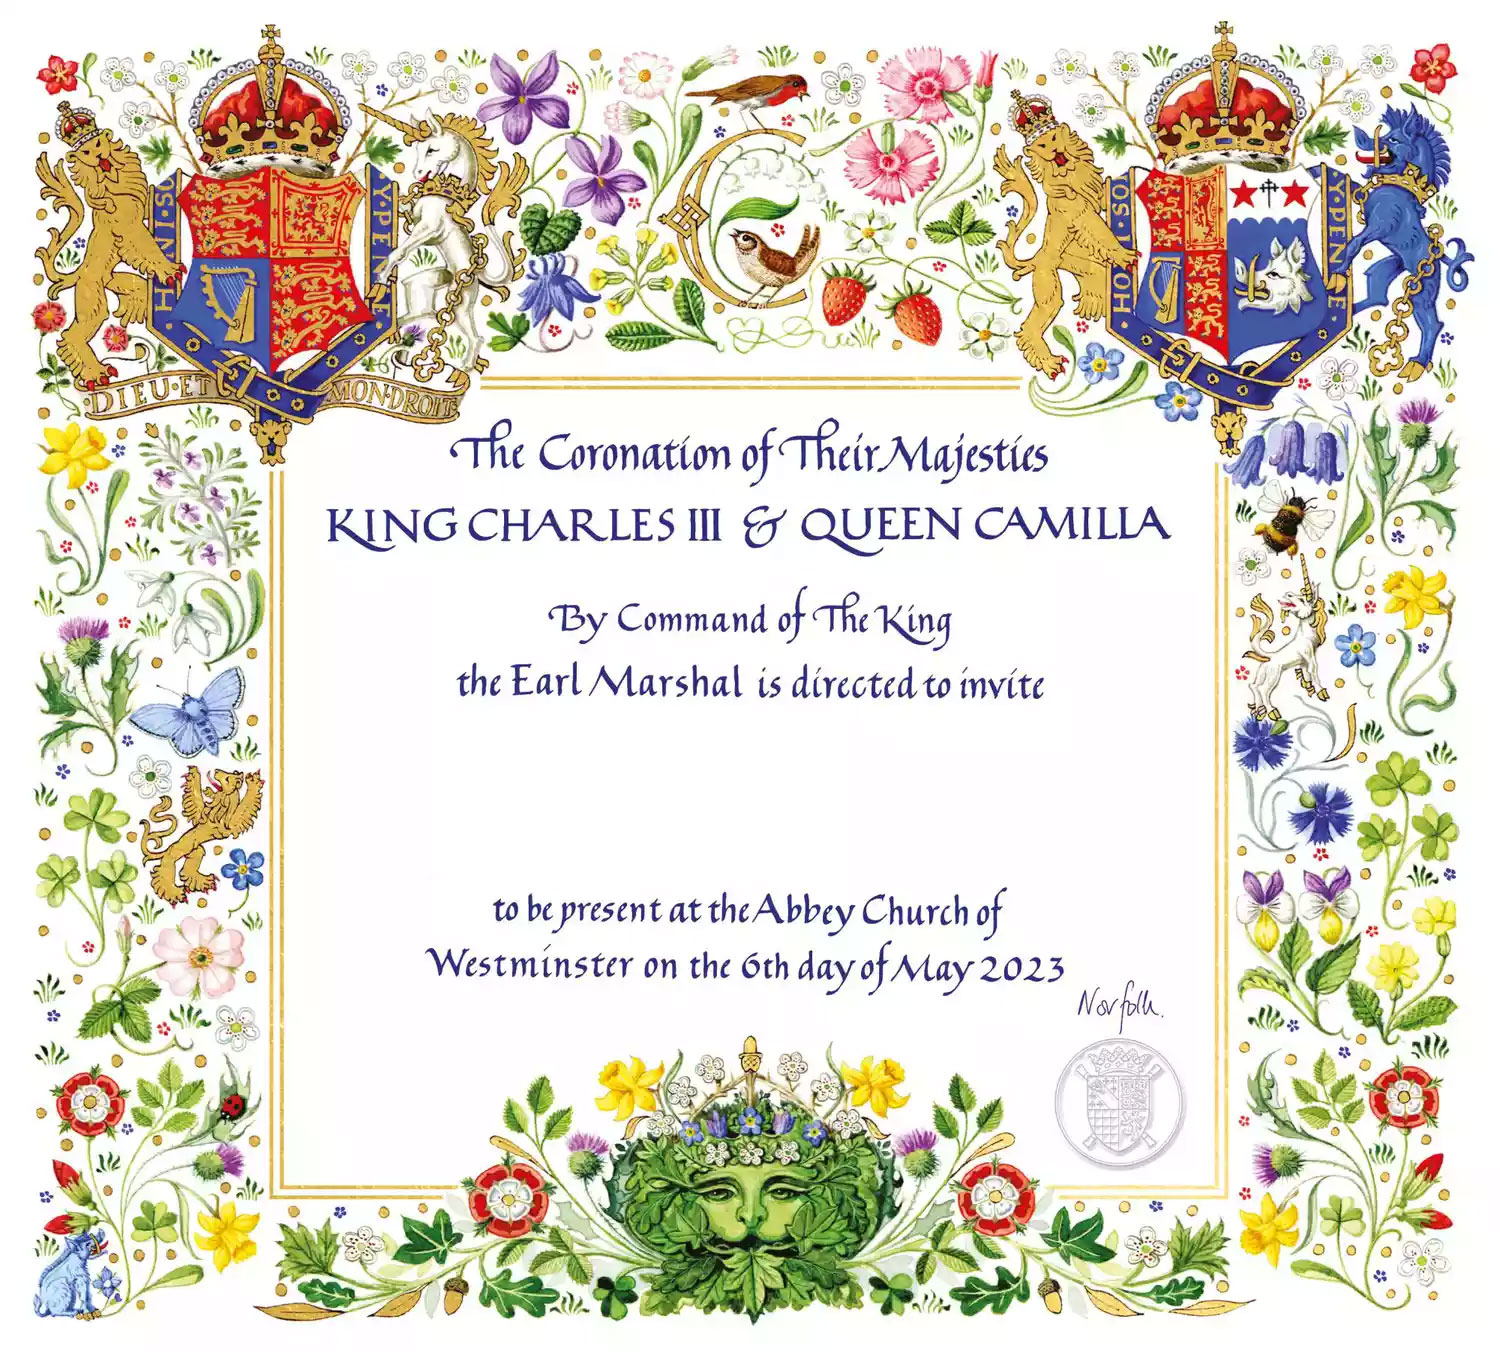 Here’s what the details of King Charles’ Coronation invitation mean